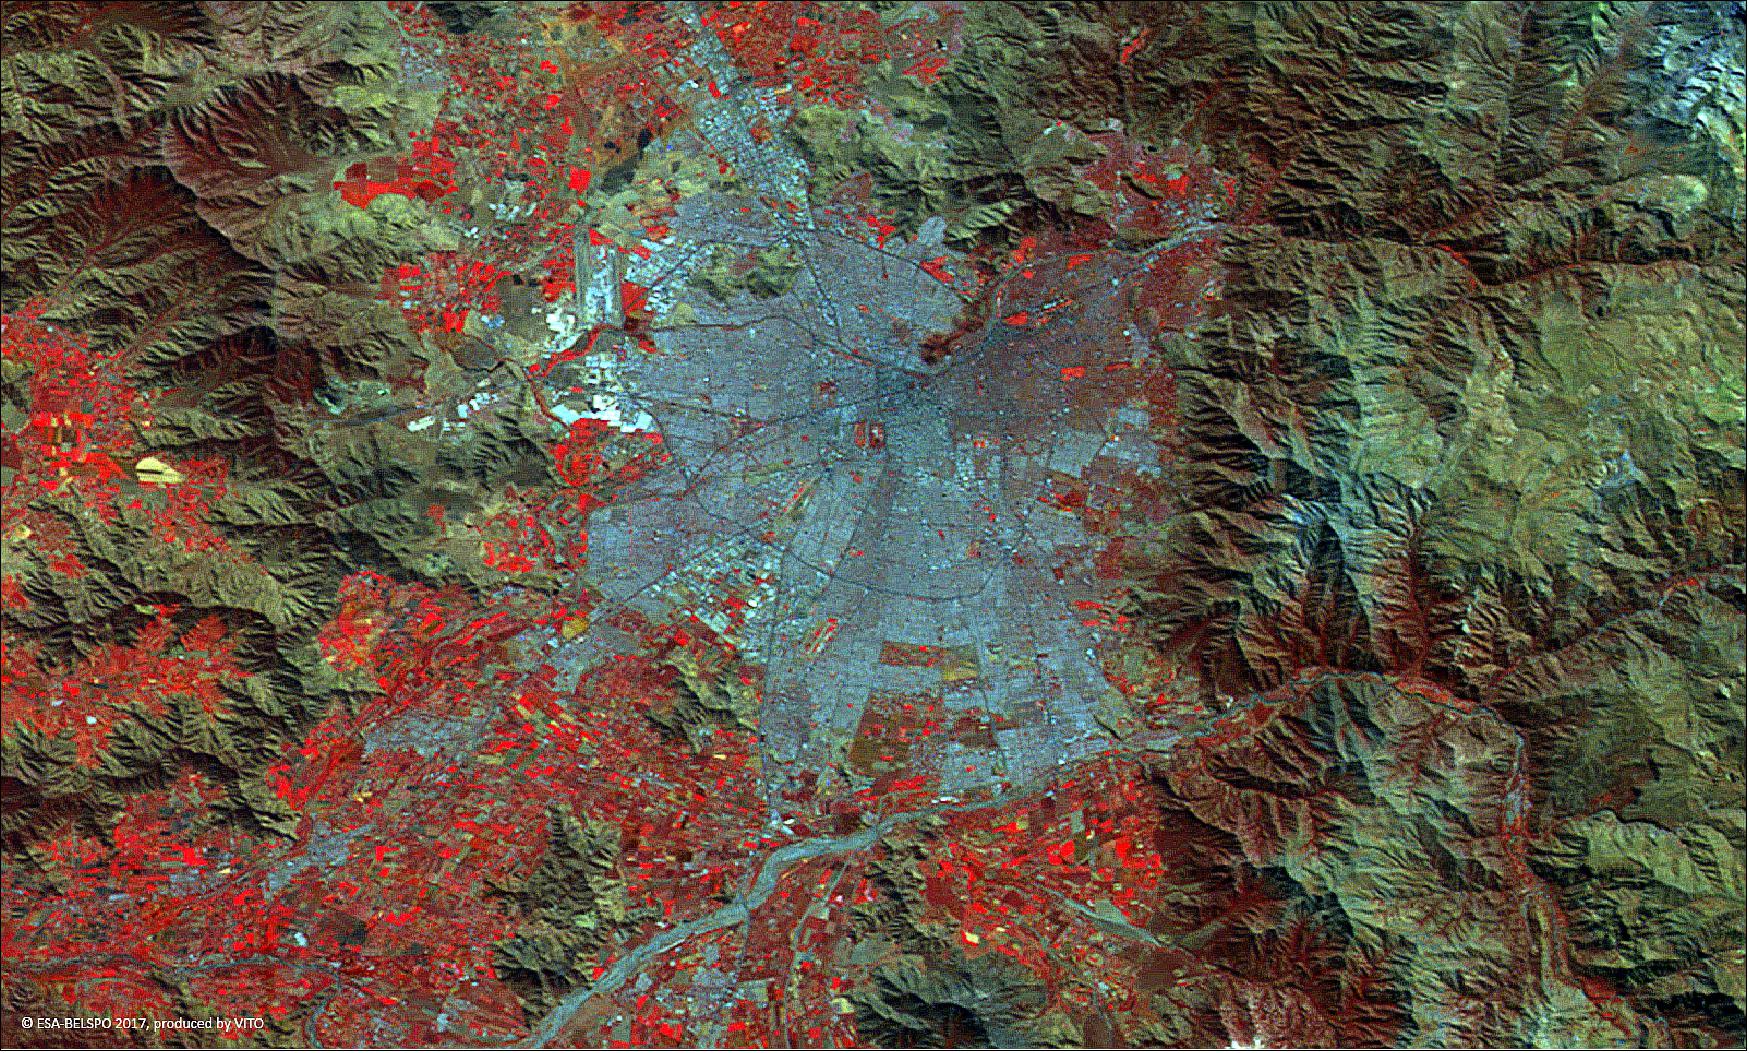 Figure 24: This 100 m spatial resolution image of Santiago de Chile was acquired on 5 April 2017 with PROBA-V (image credit: ESA/Belspo – produced by VITO)